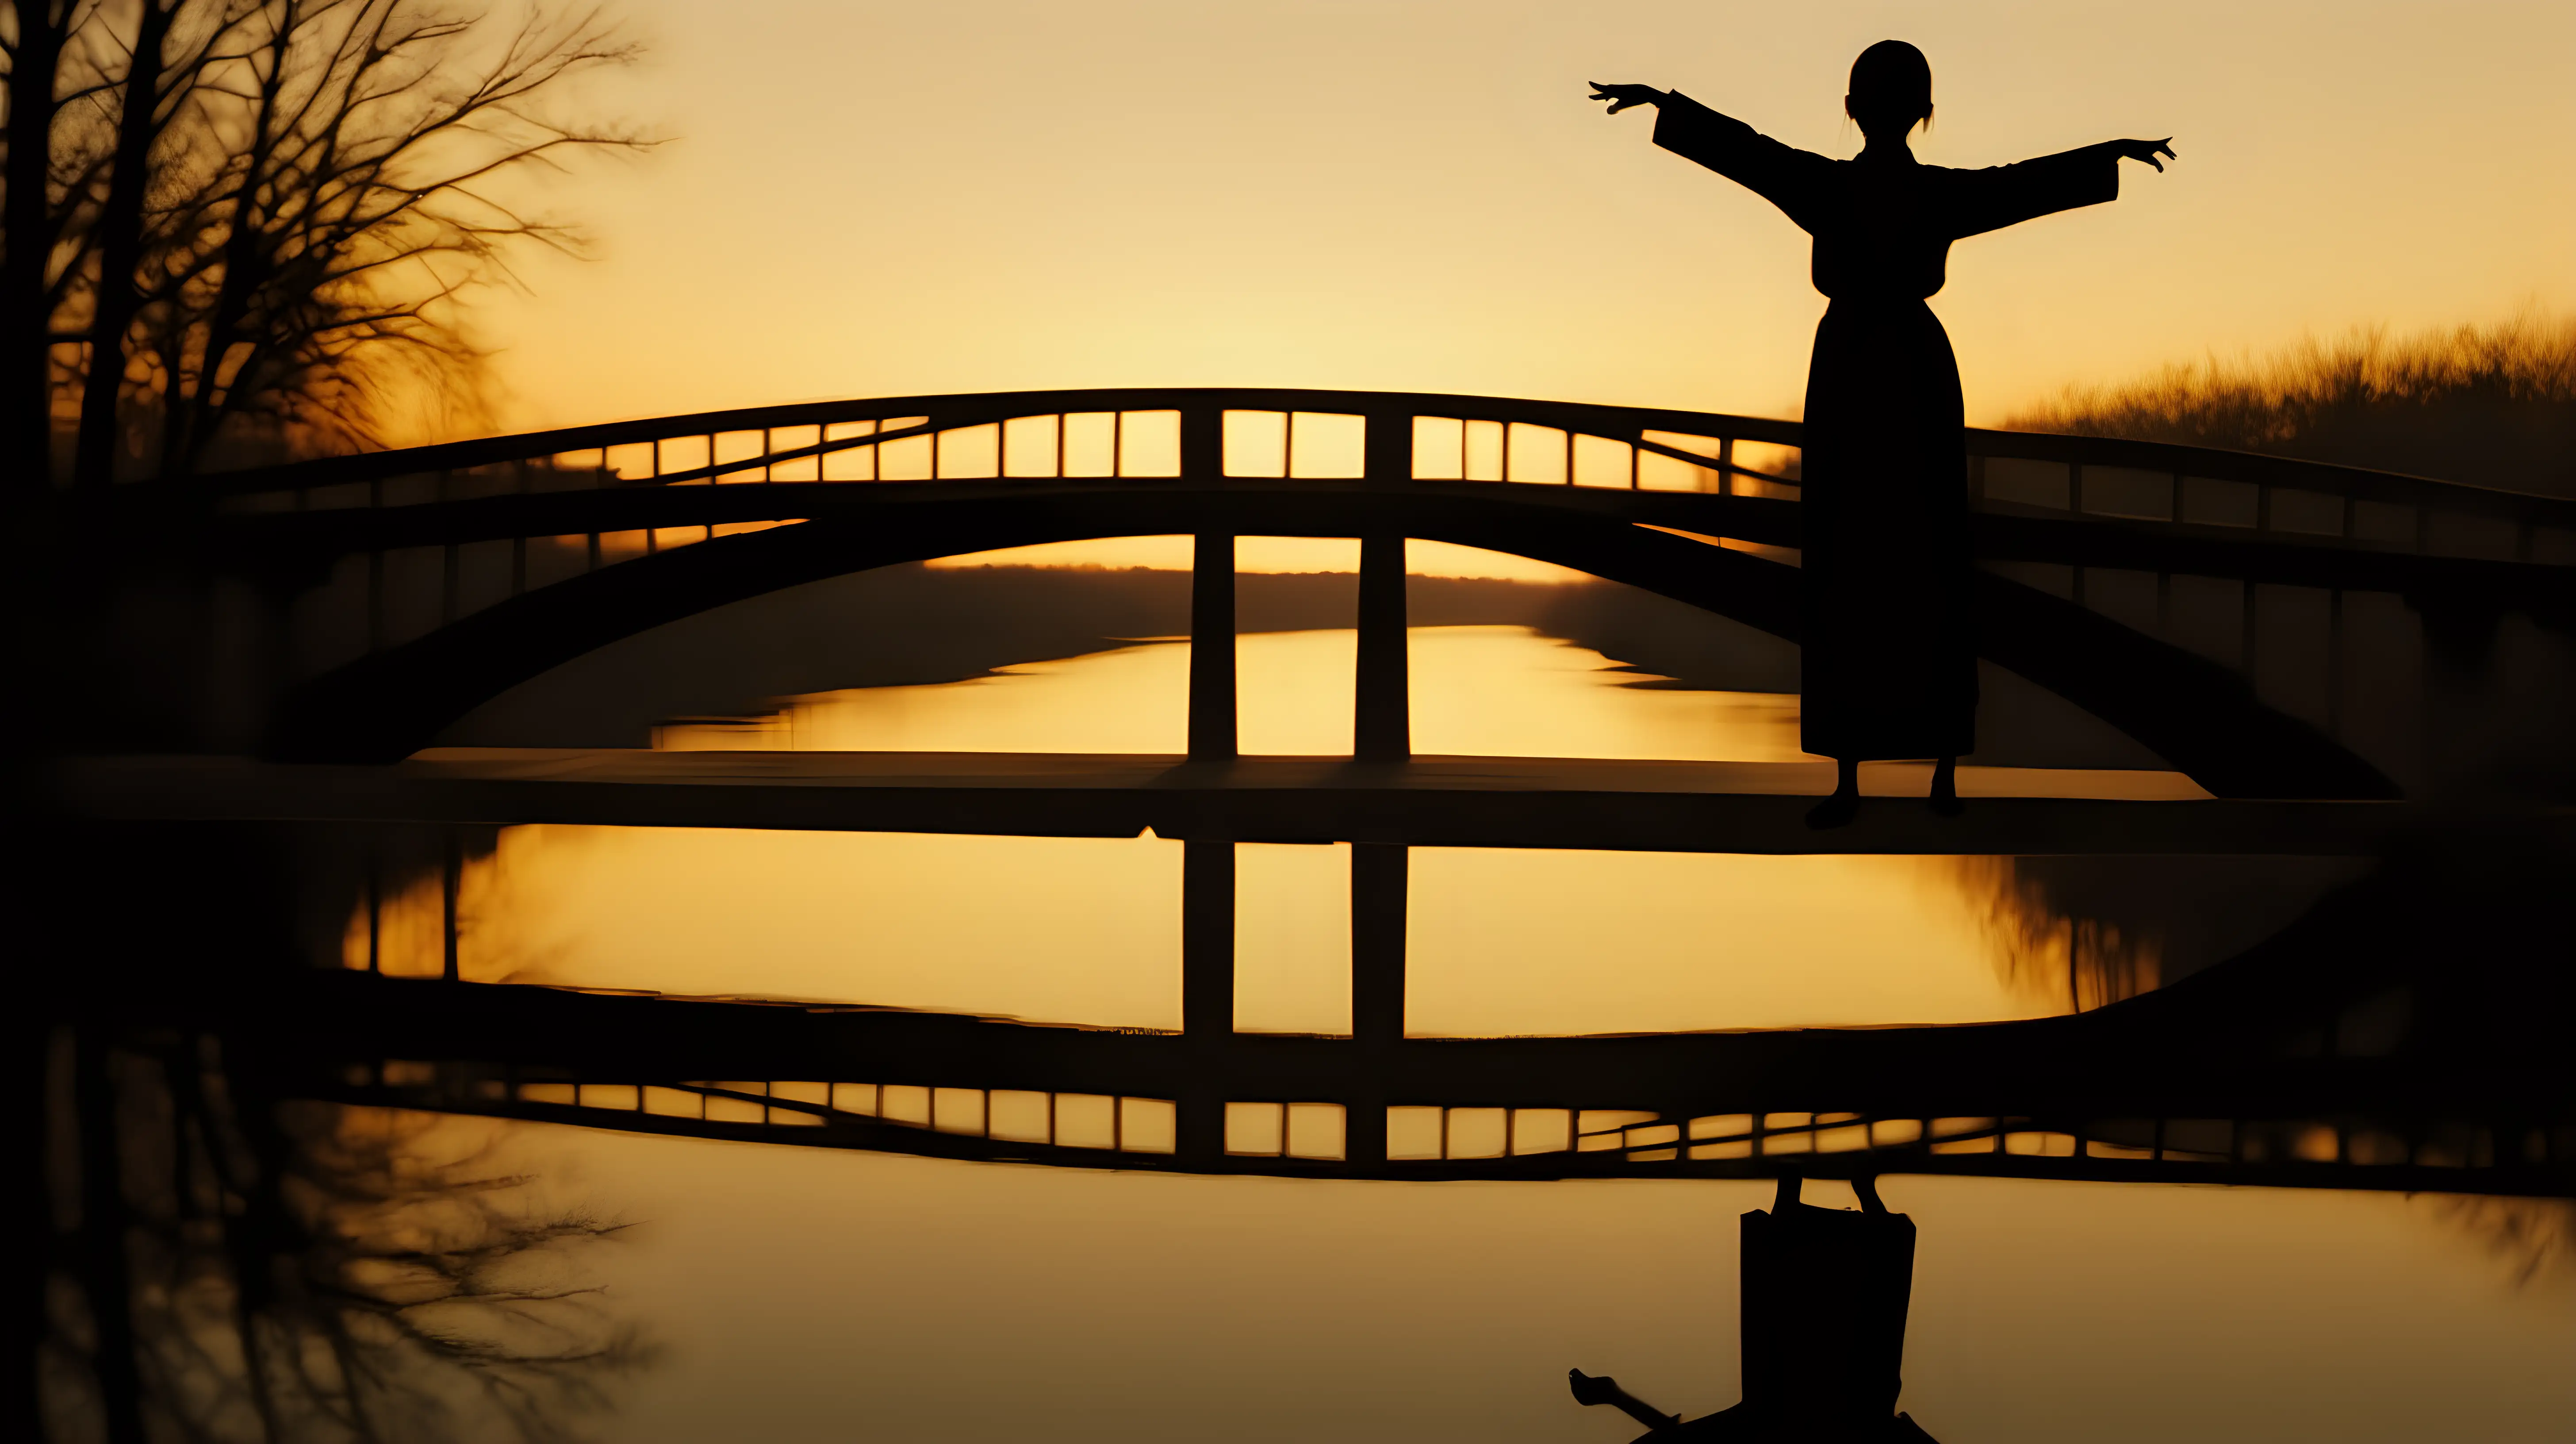 Golden Hour Silhouette on Bridge Journey and Reflection